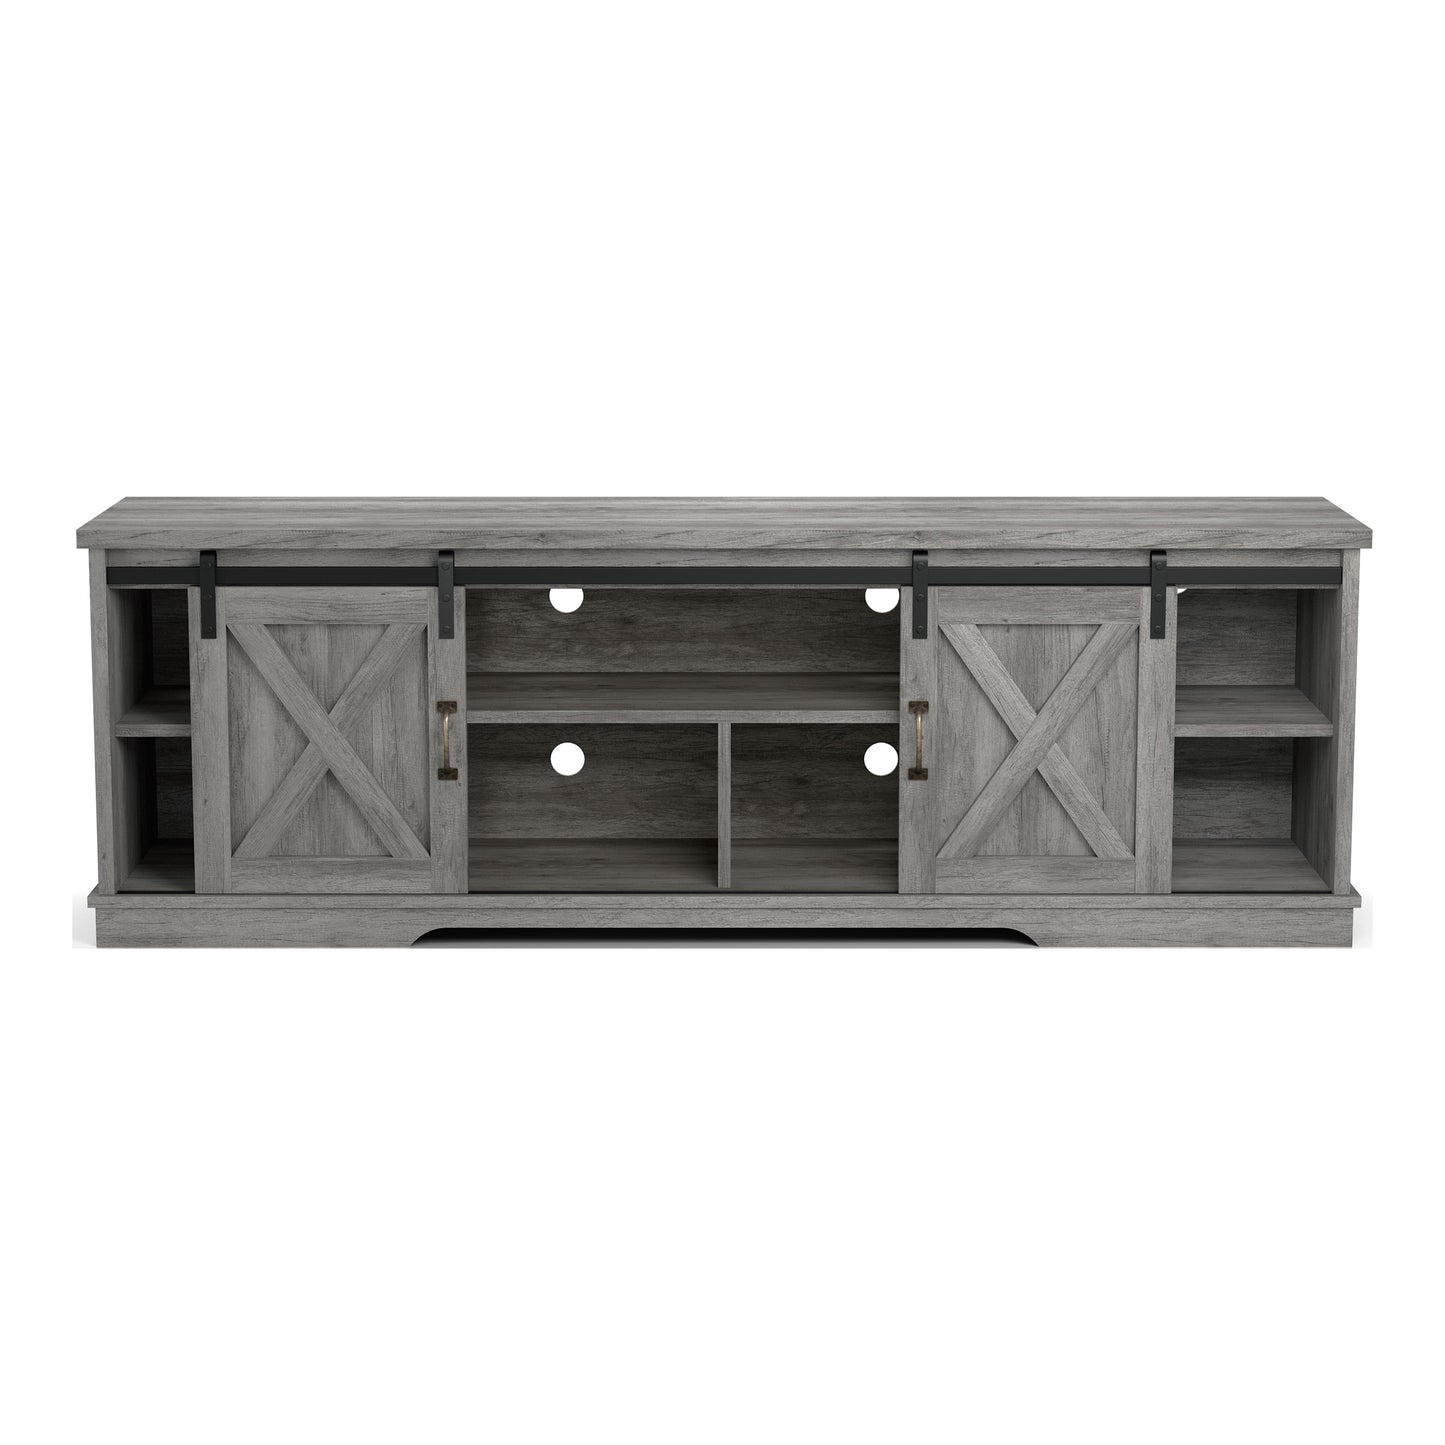 Front-facing stand with sliding doors only from a two-piece rustic vintage gray oak TV stand and pier entertainment set on a white background